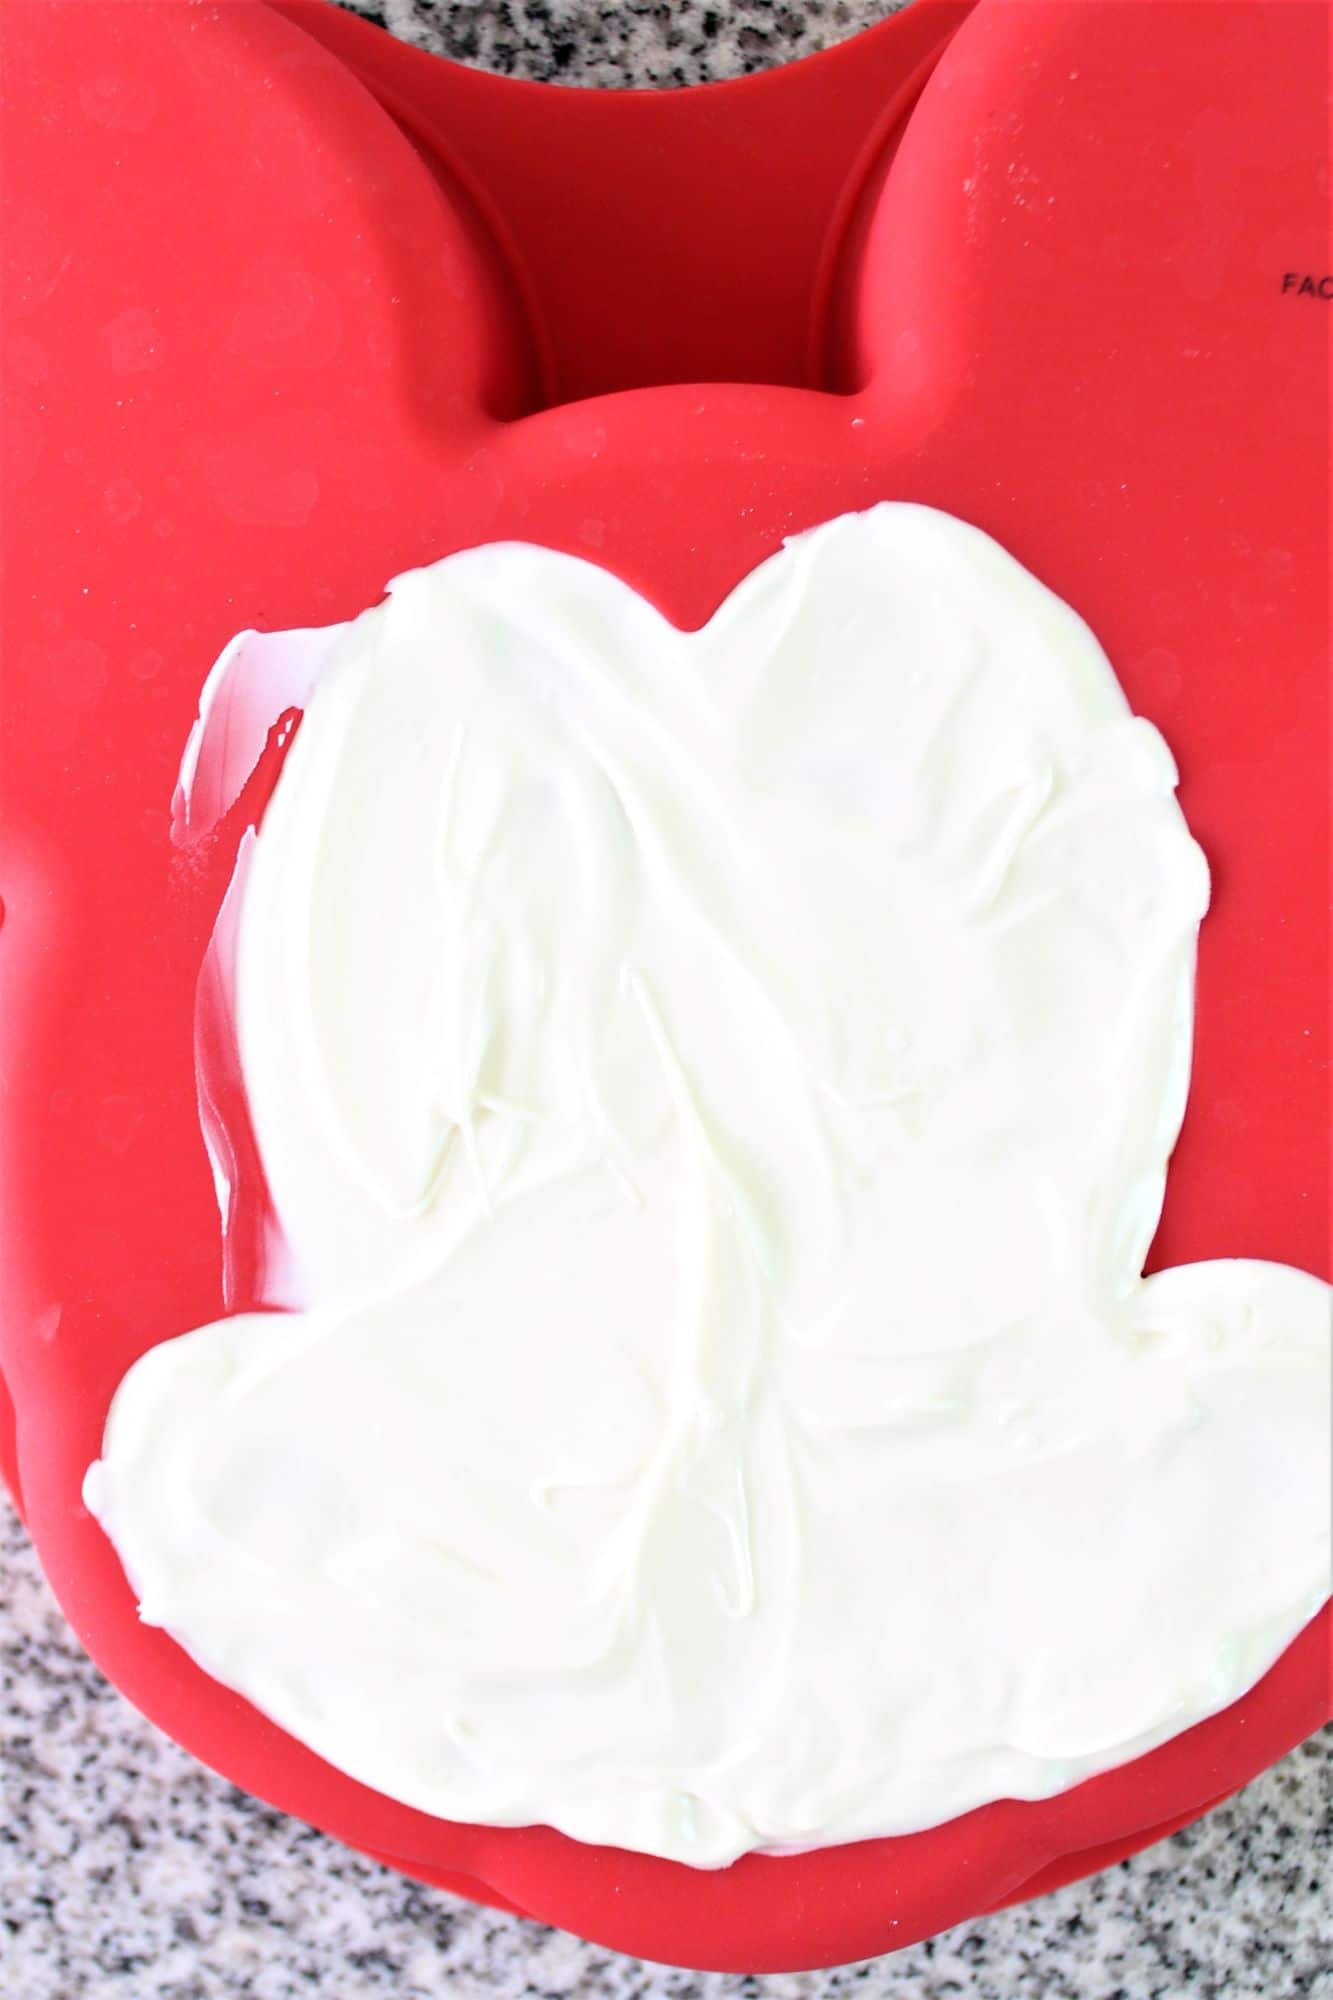 white chocolate spread onto mickey face of red silicone cake mold.